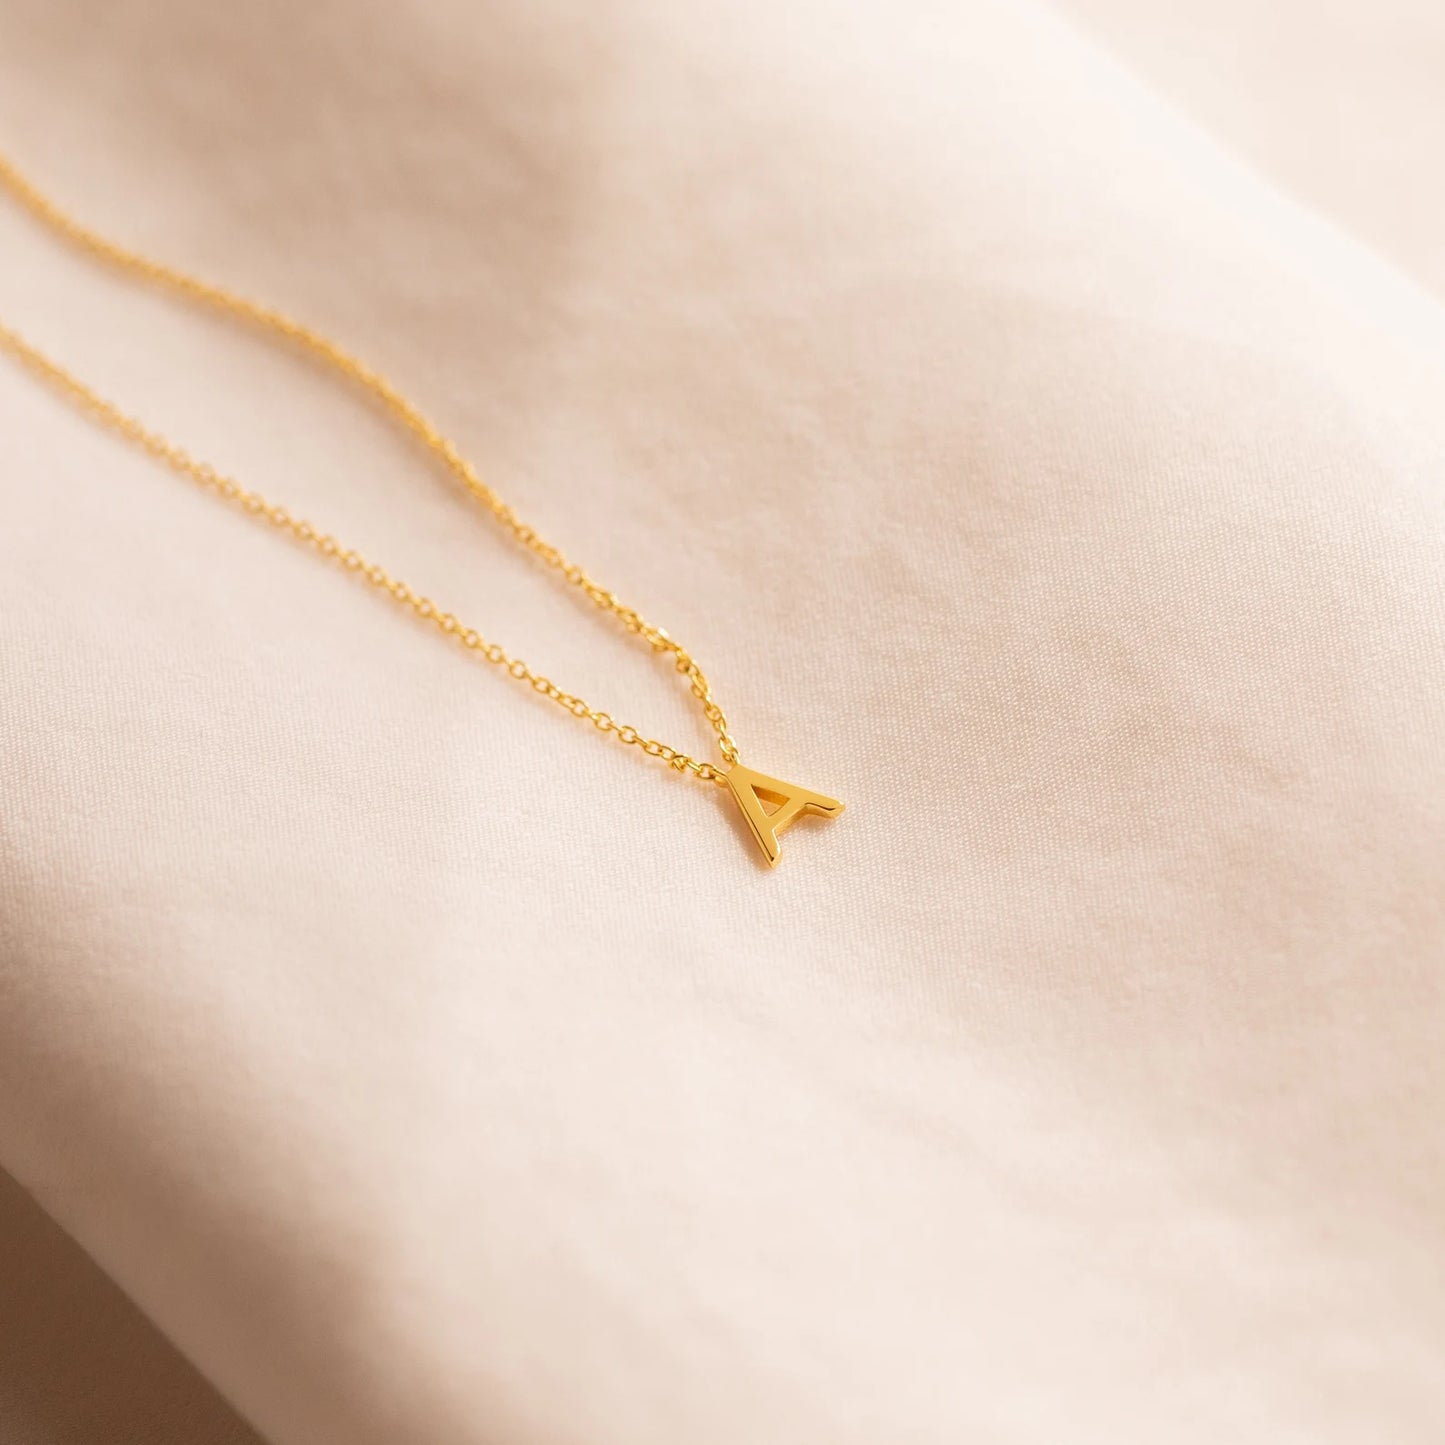 Gold initial necklace featuring exquisite craftsmanship, perfect for adding a touch of personalized elegance to your style.